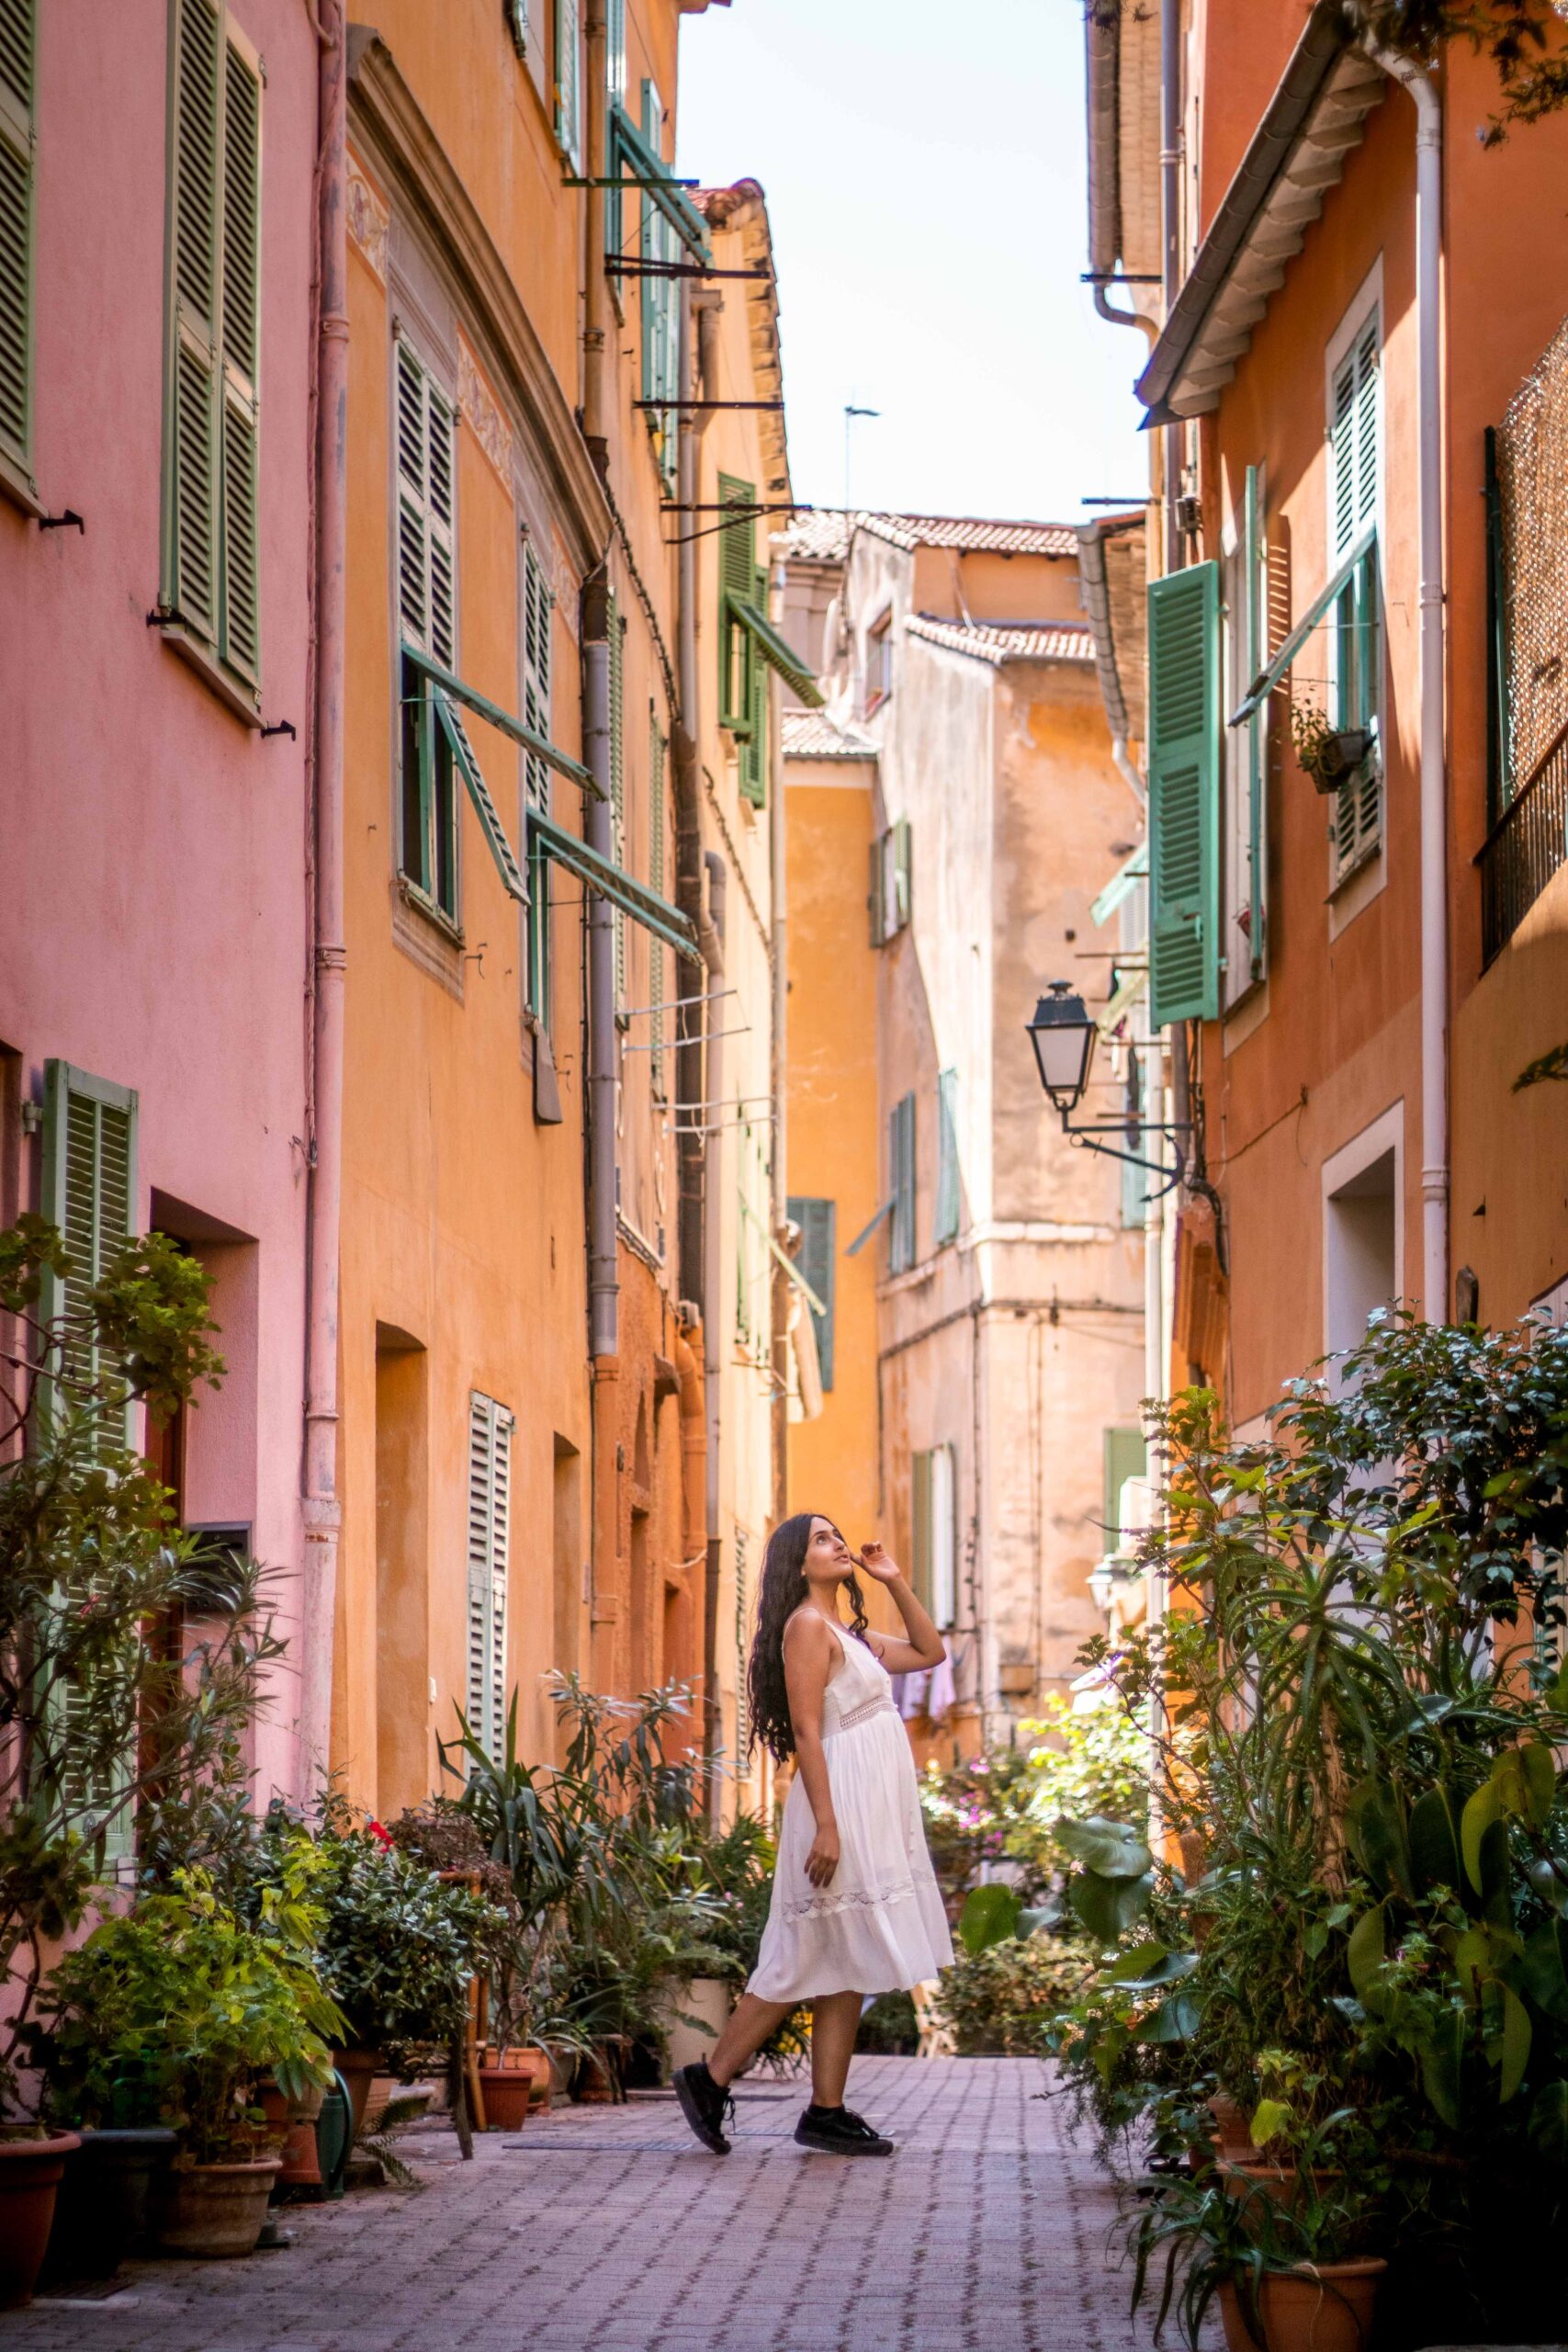 Woman wearing a white dress posing in a narrow and colourful street with several plants in the Old Town of Villefranche-sur-Mer, France